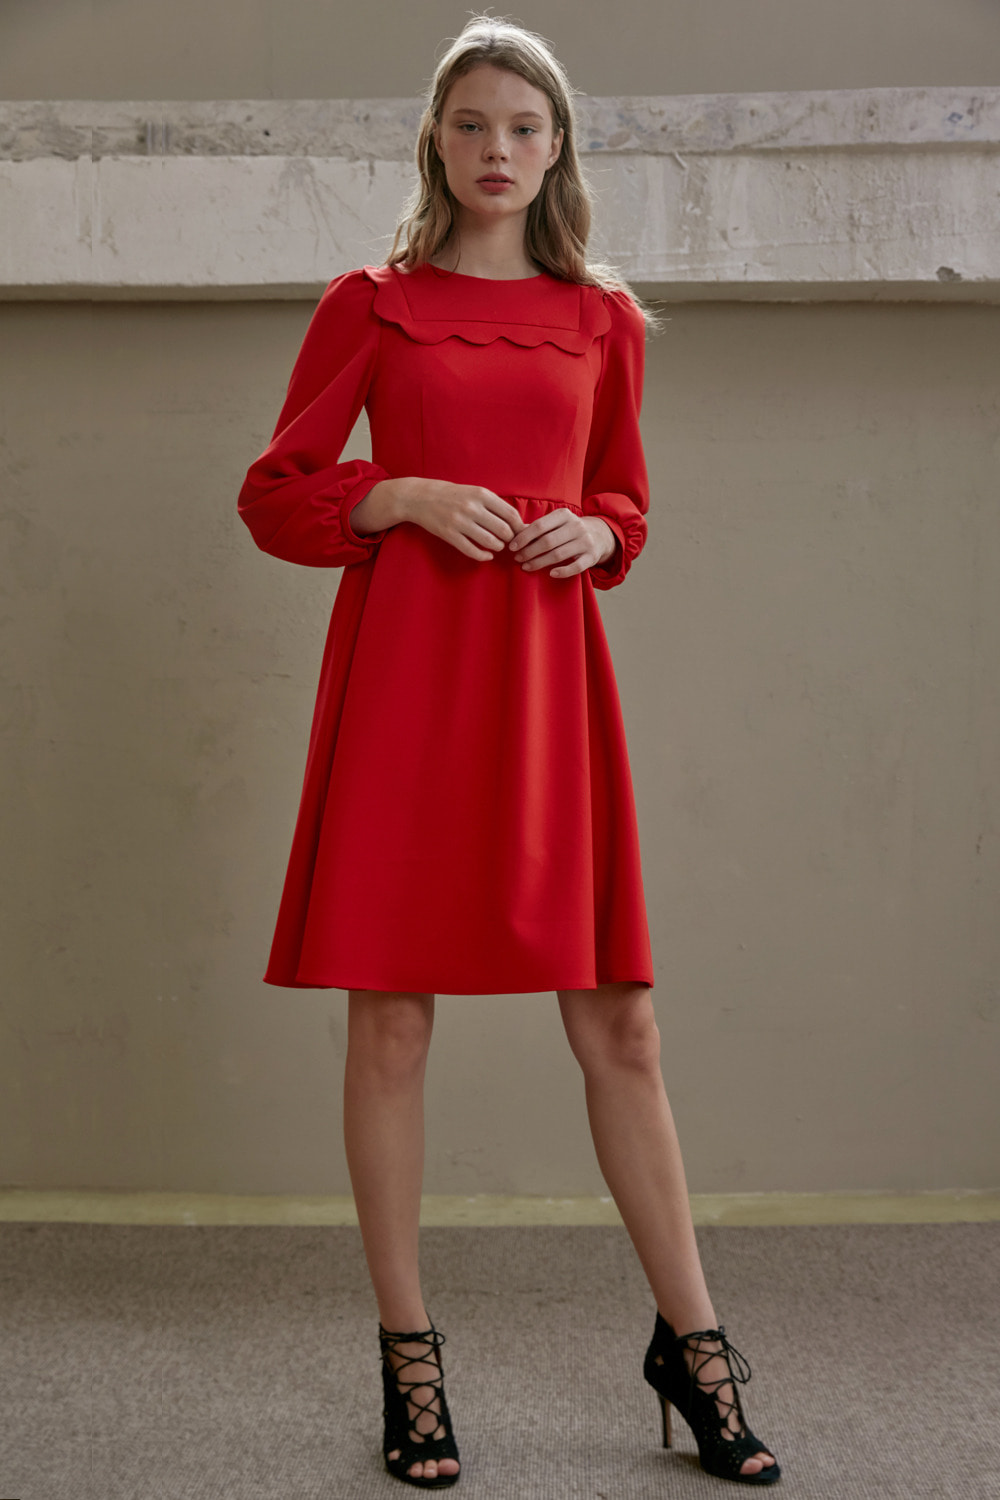 Scallop detail red dress